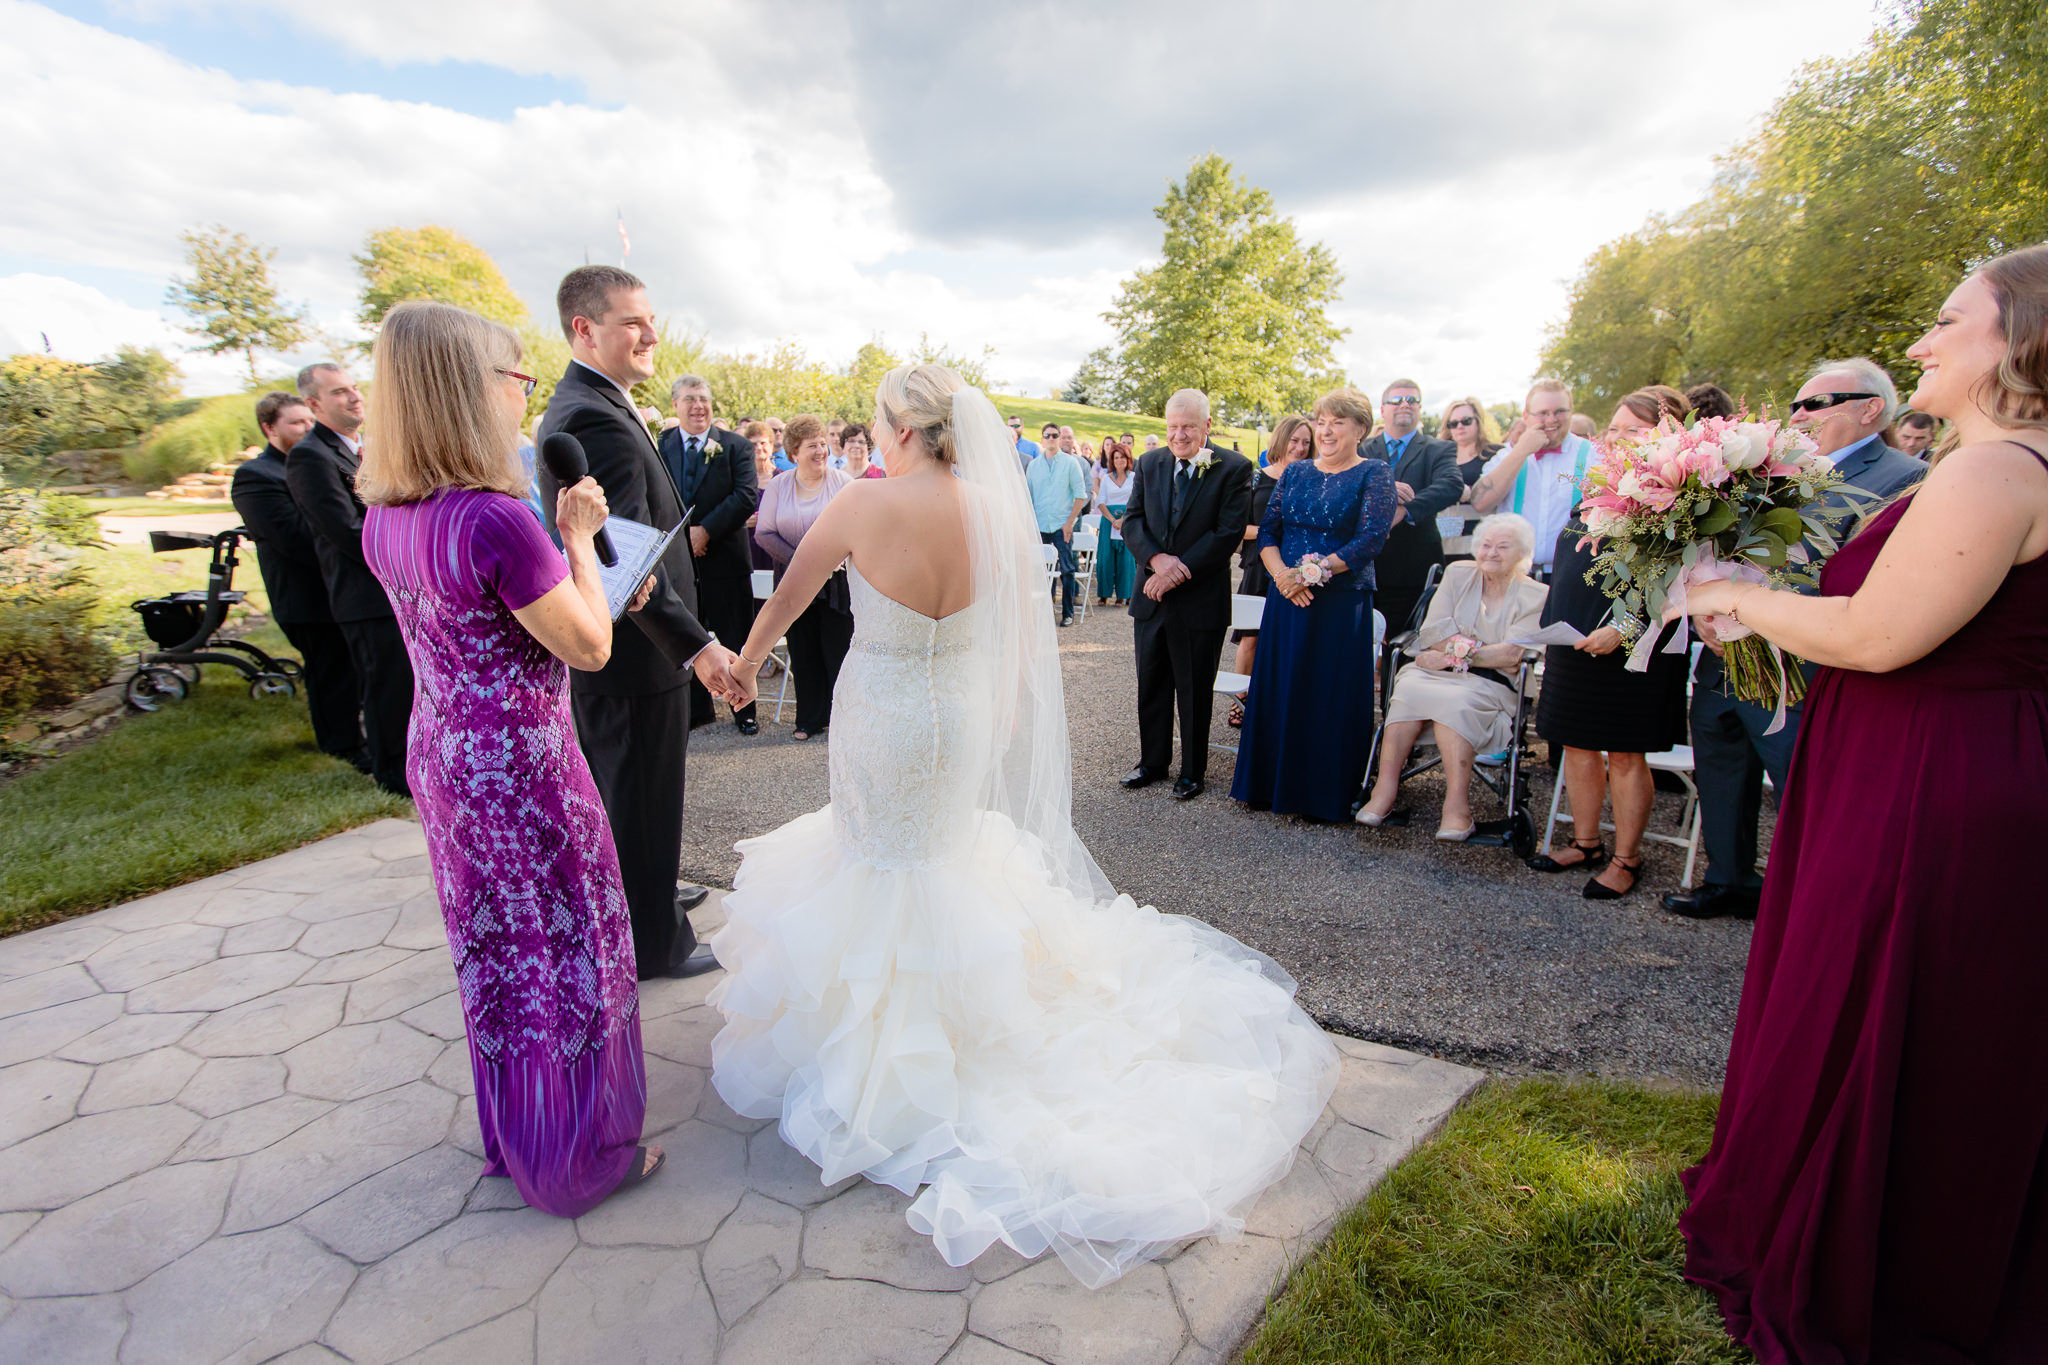 Guests stand to honor the bride & groom at a Greystone Fields wedding